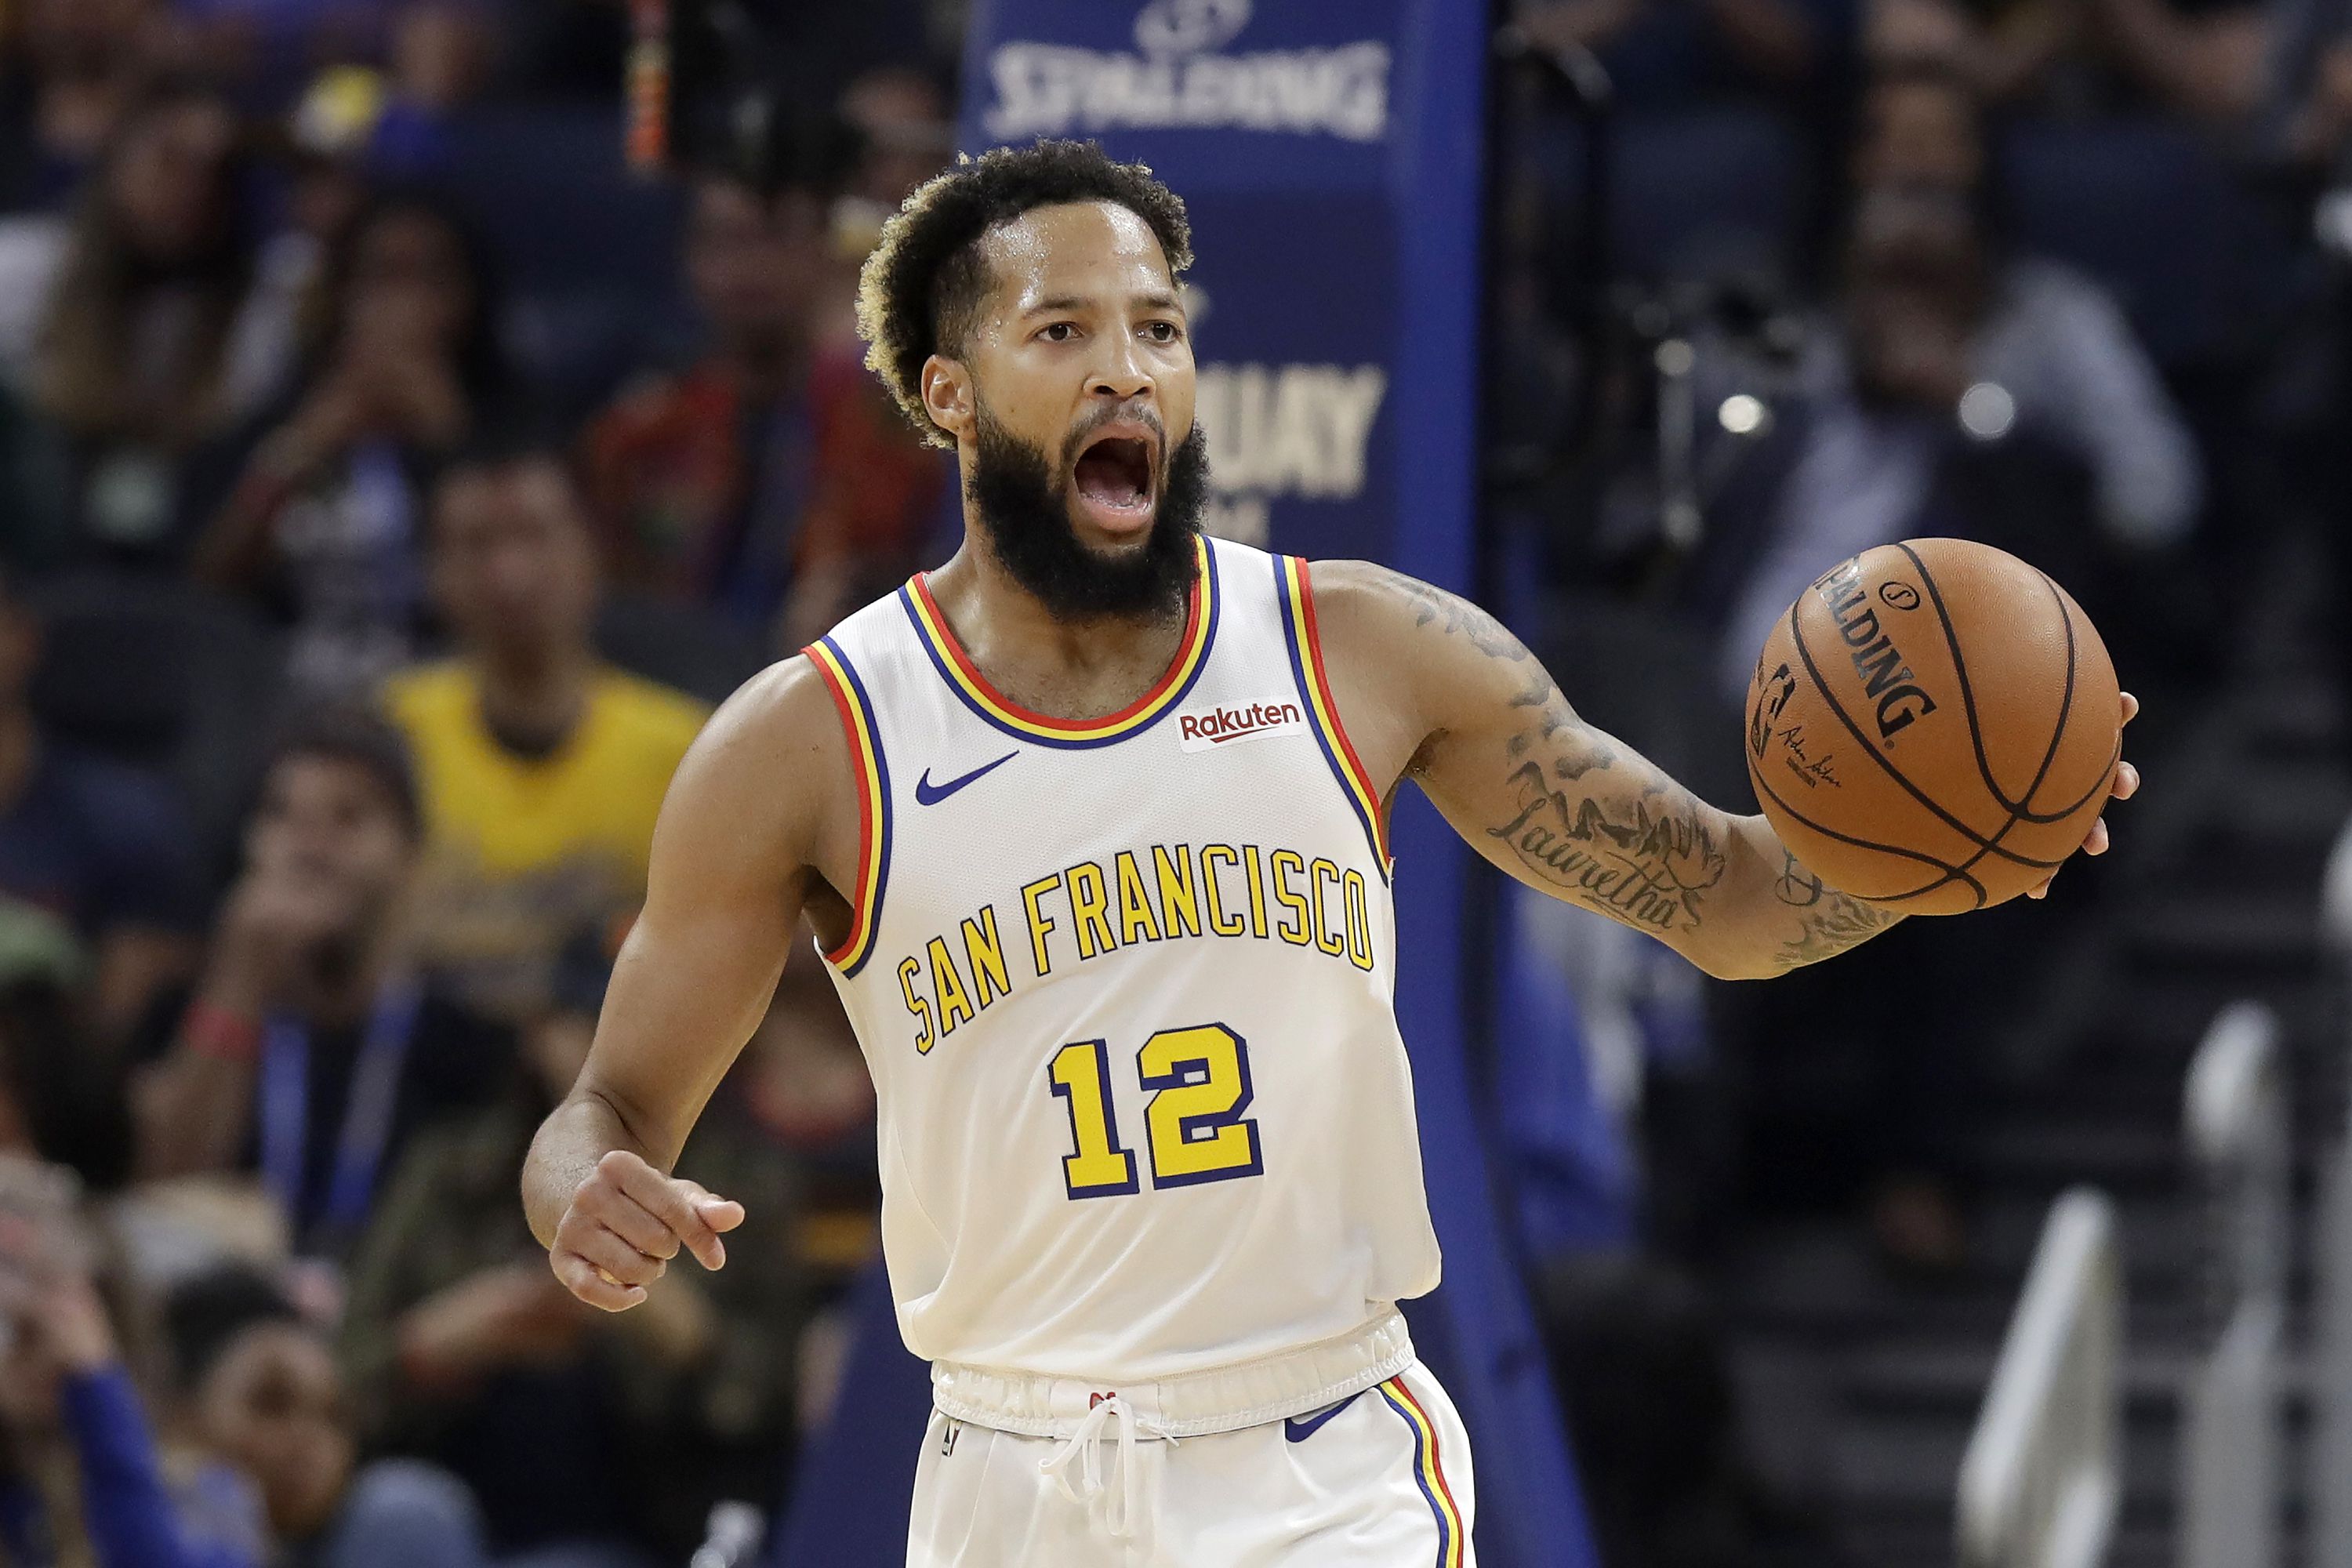 2019-20 Ky Bowman Plays of the Year, Ky Bowman's #WarriorsTop10 Plays of  the Year ✈️, By Golden State Warriors